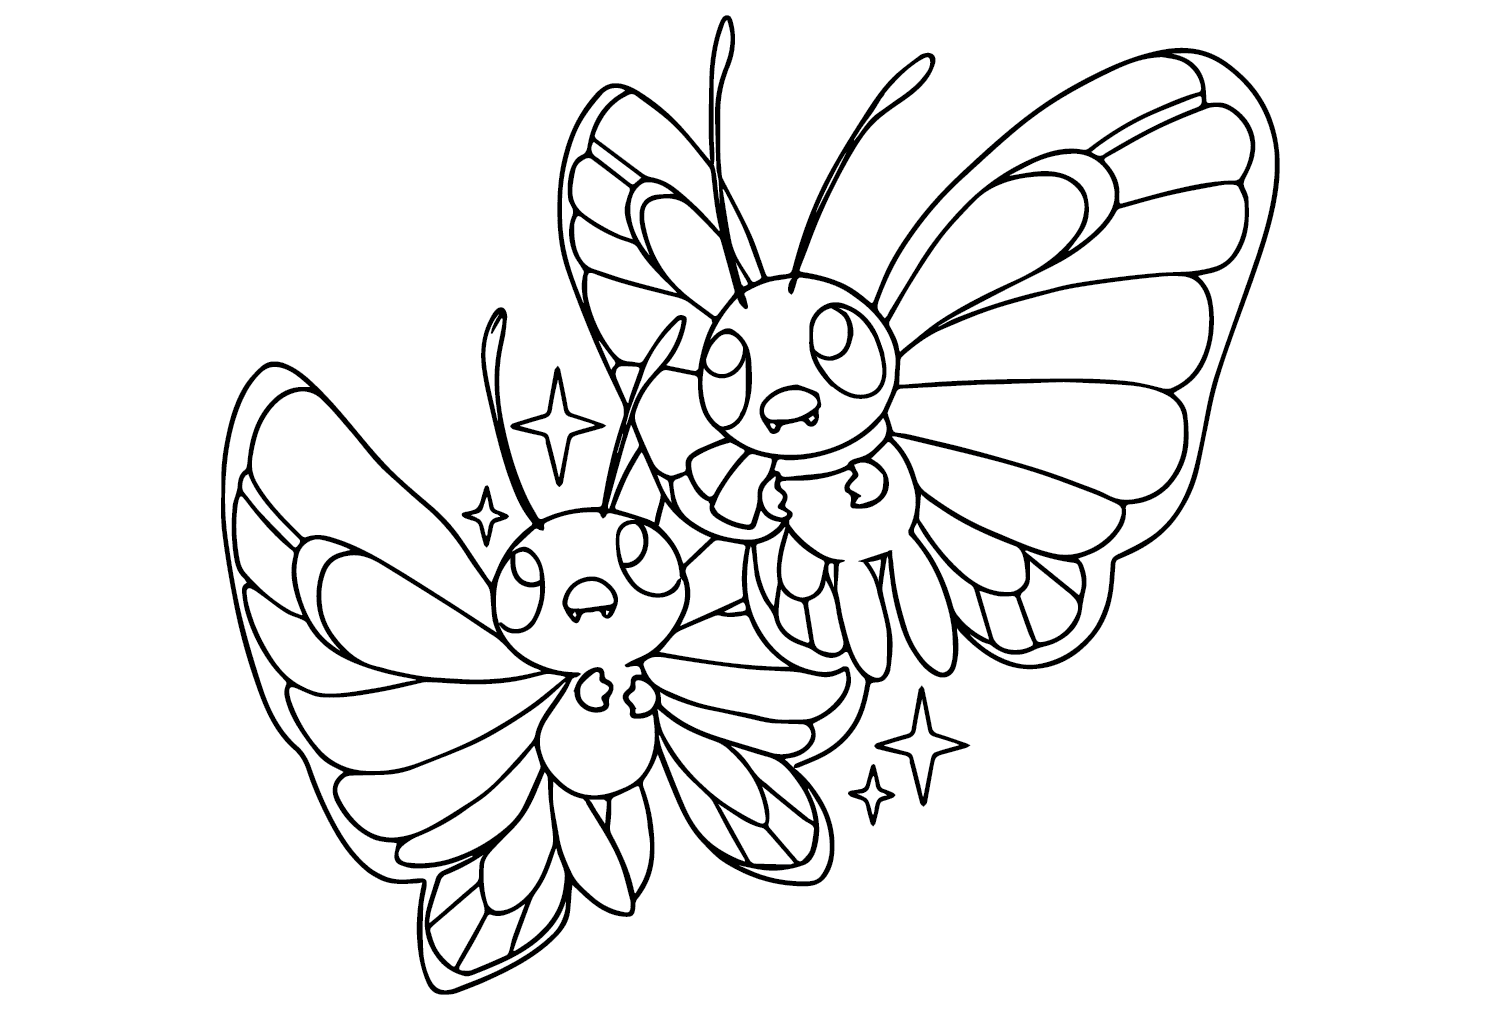 Butterfree Coloring Page Free from Butterfree